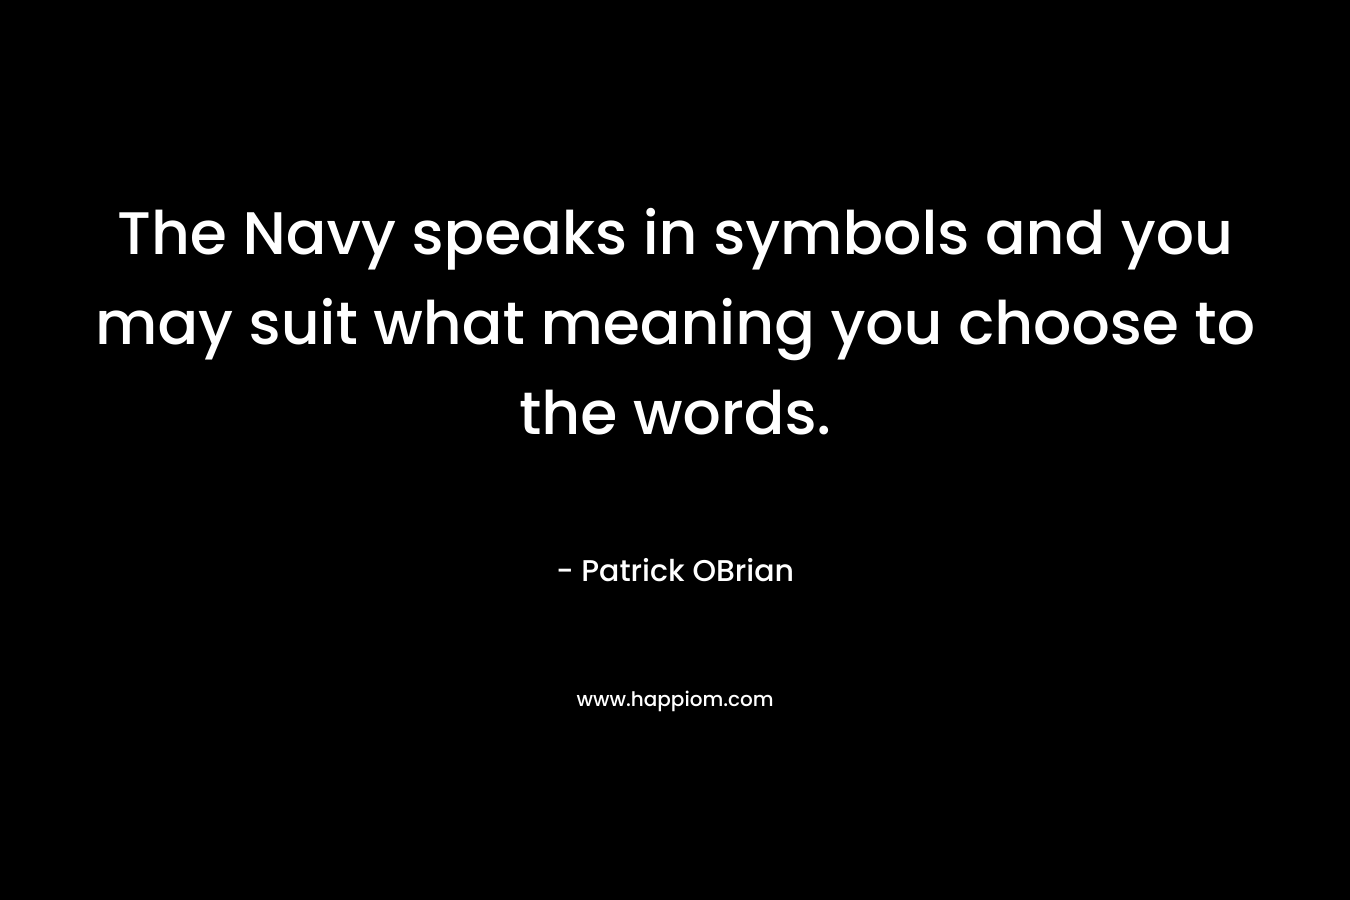 The Navy speaks in symbols and you may suit what meaning you choose to the words.